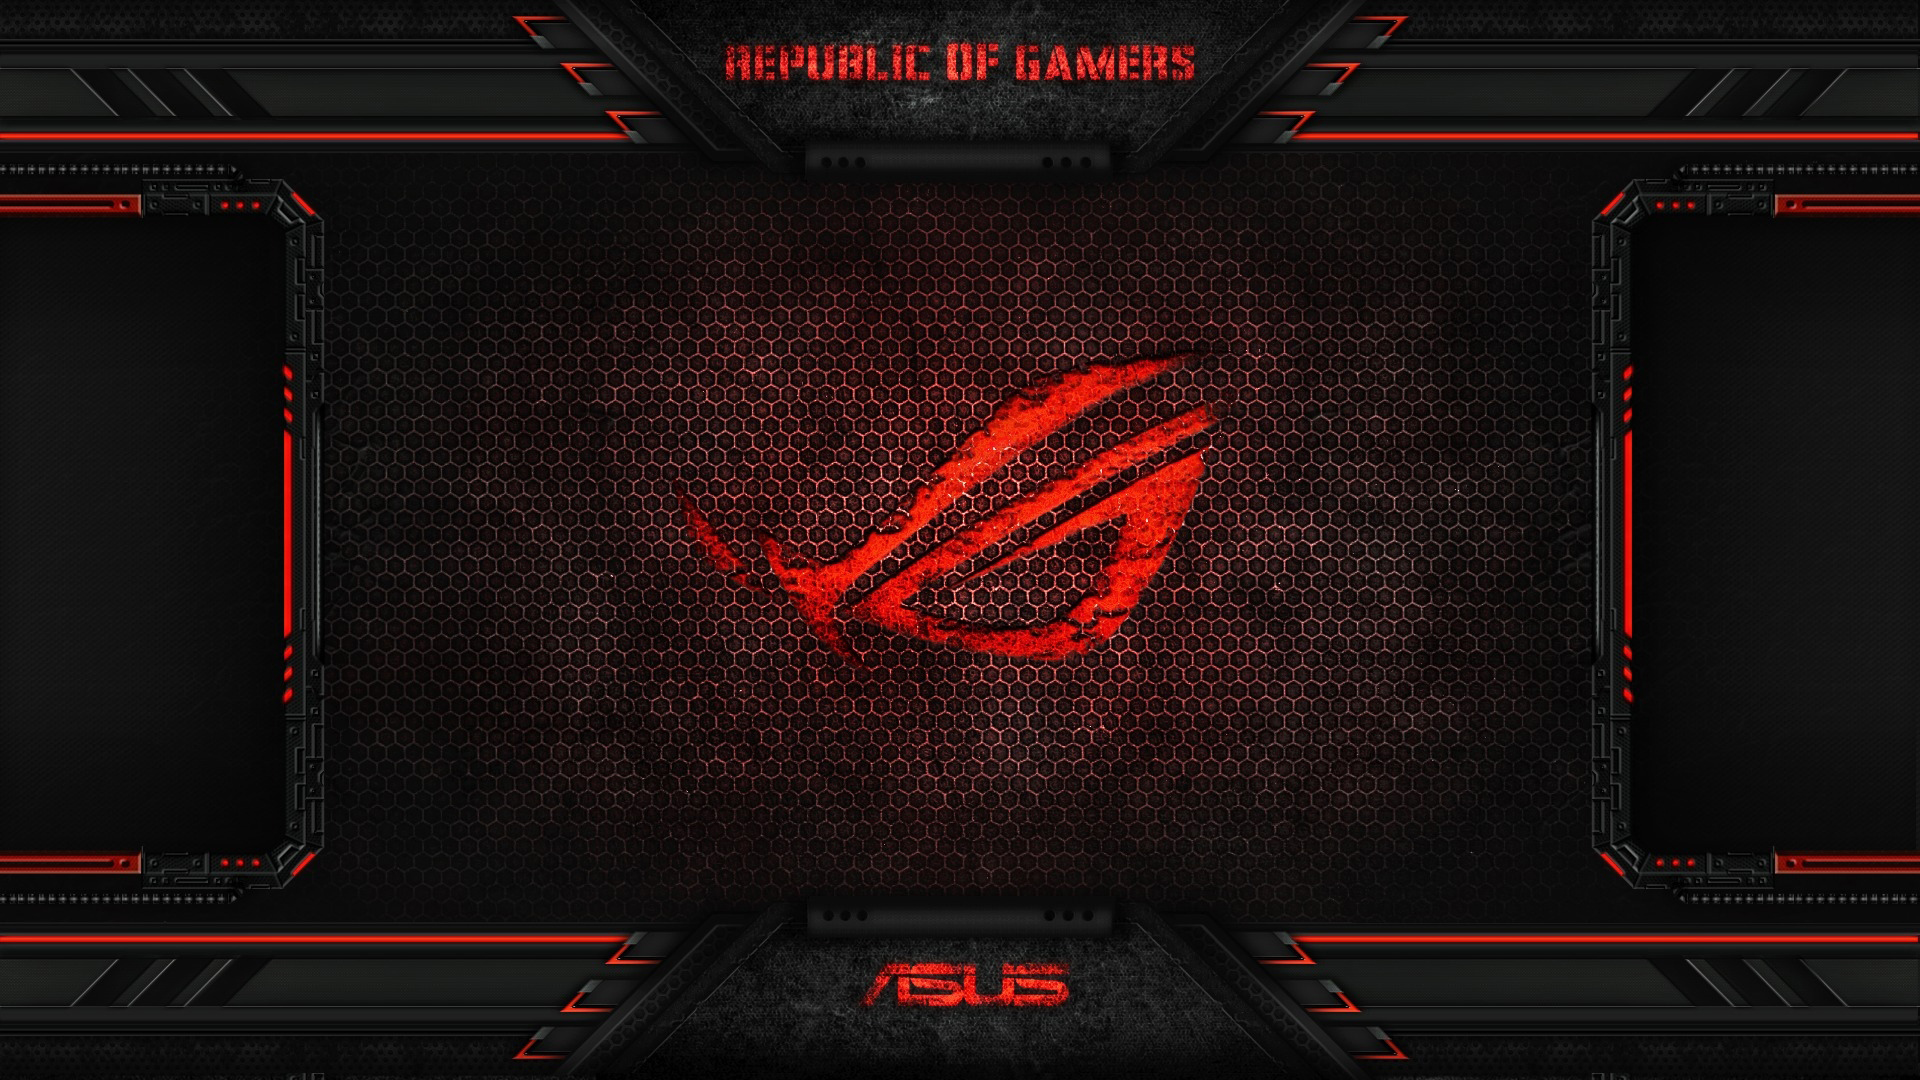 republic of gamers asus wallpapers55com   Best Wallpapers for PCs